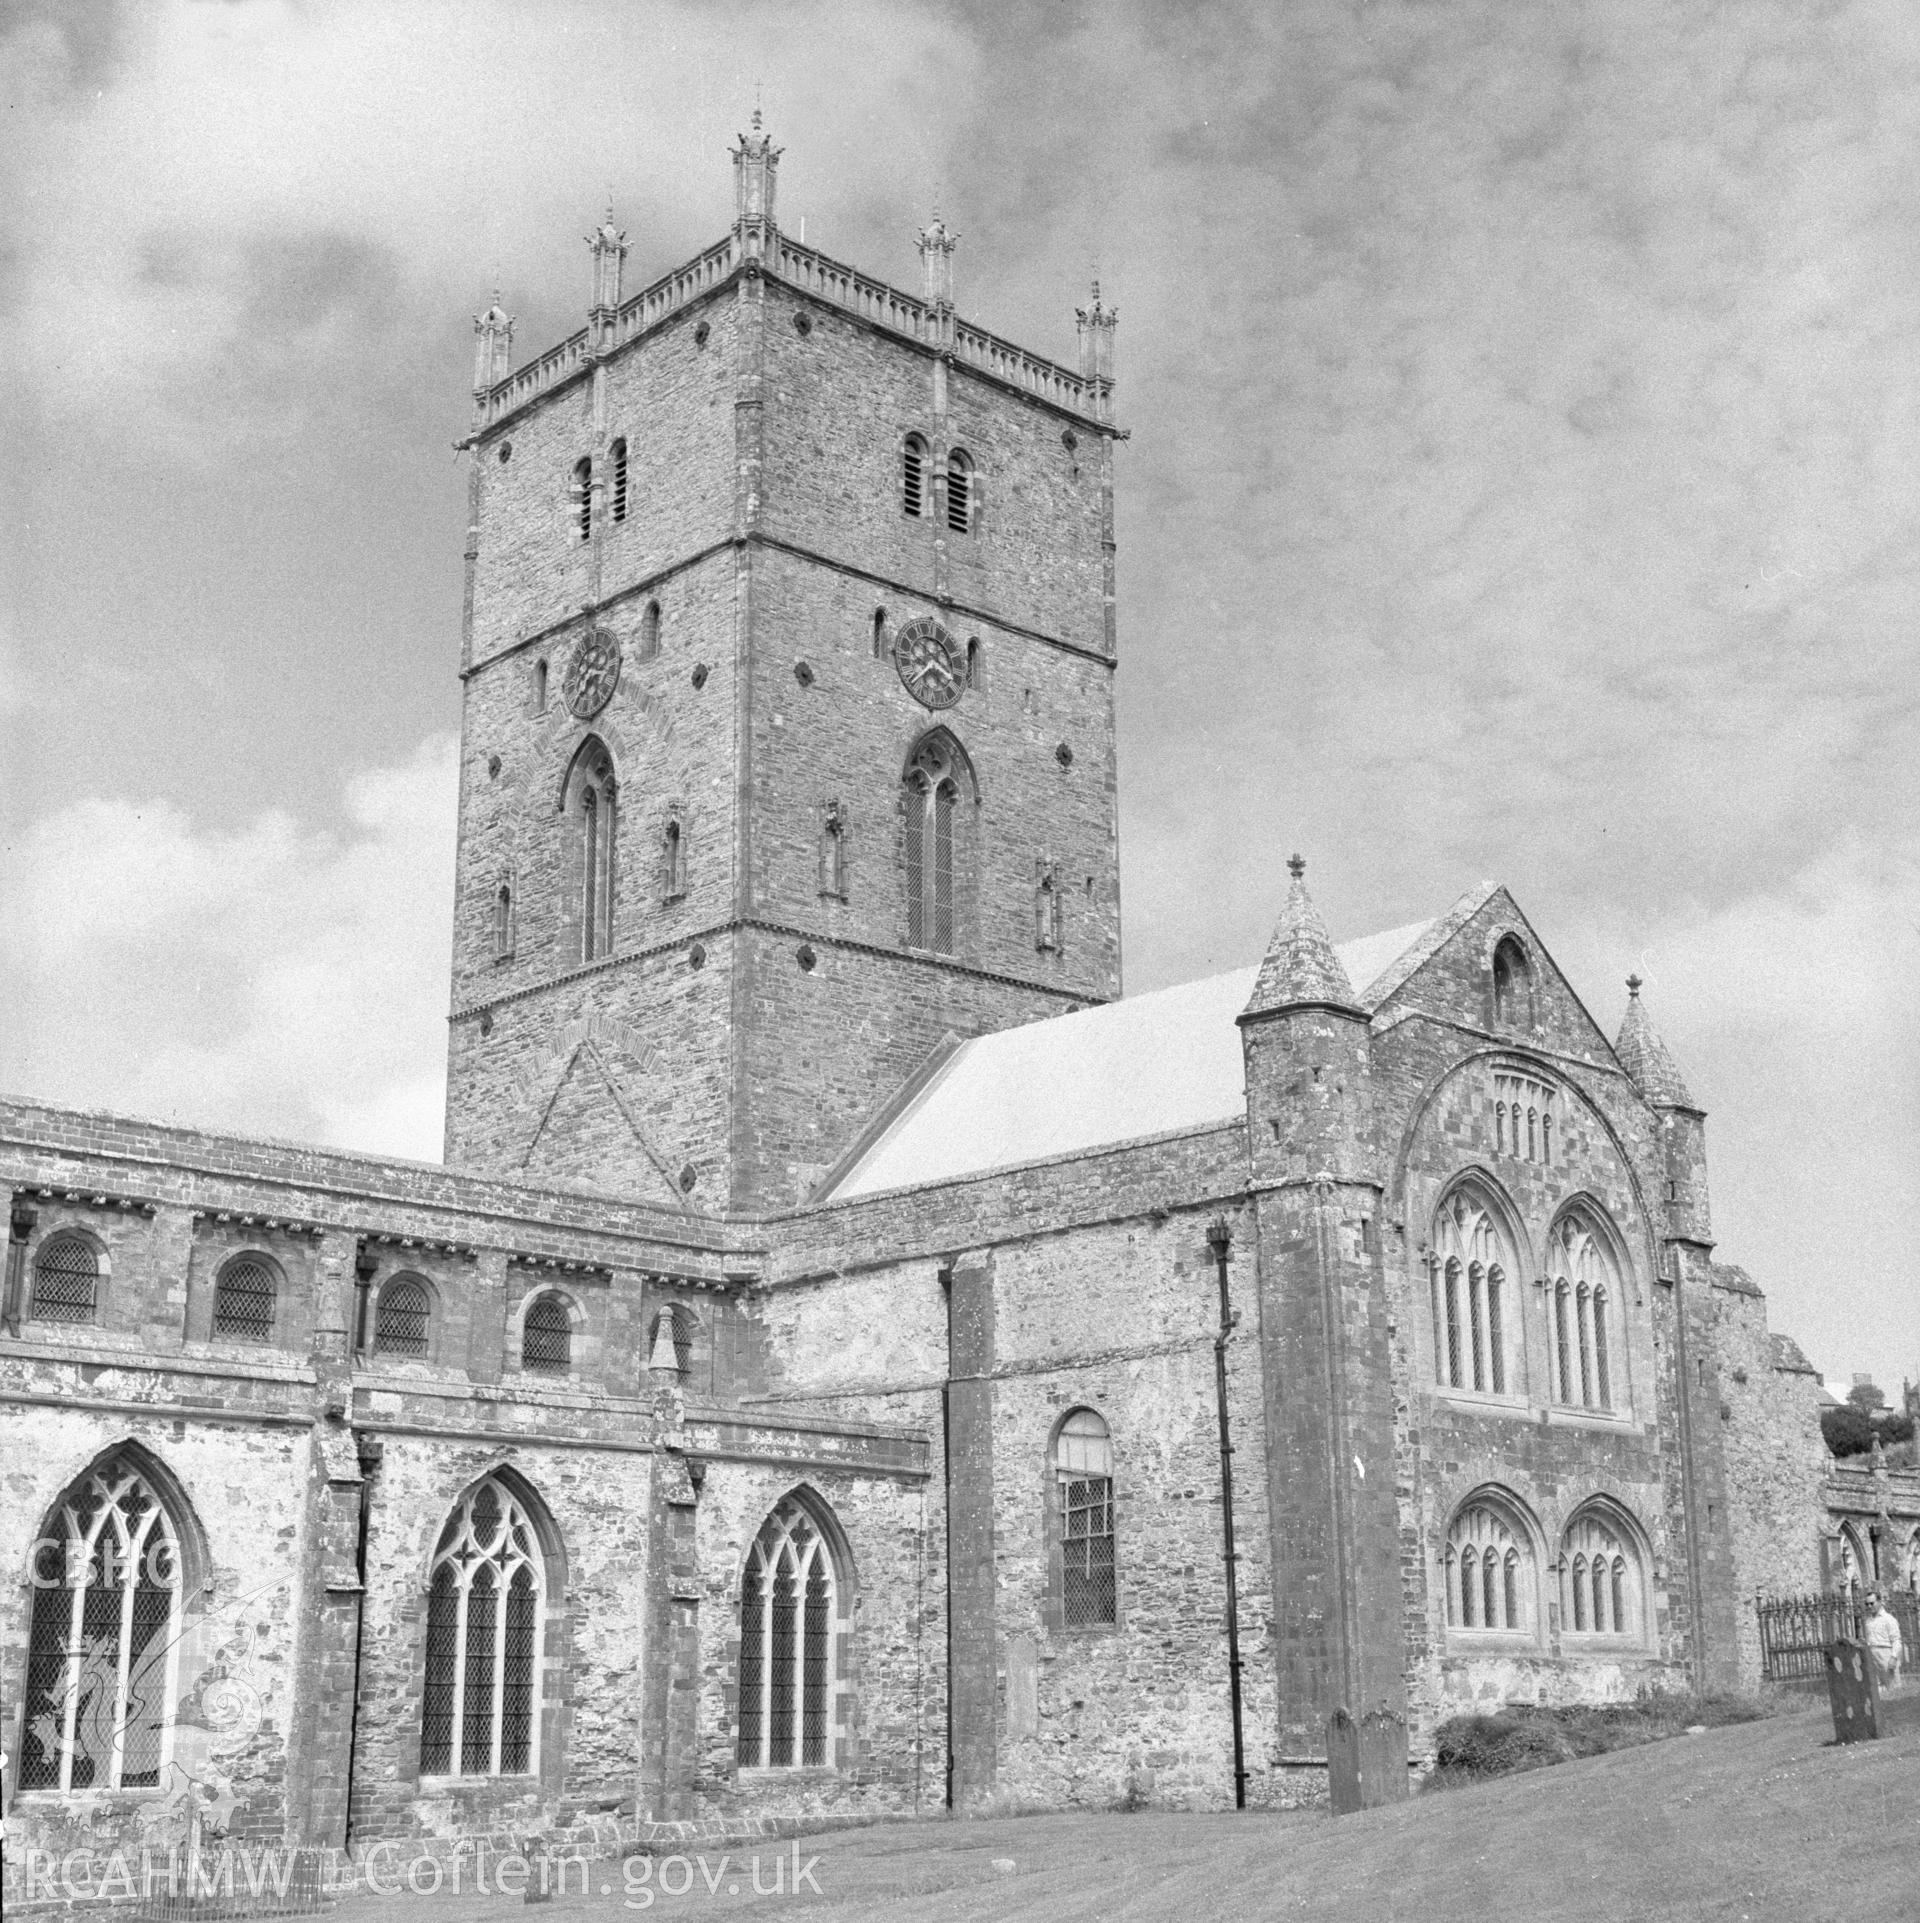 Digital copy of an acetate negative showing St David's Cathedral, September 1967.